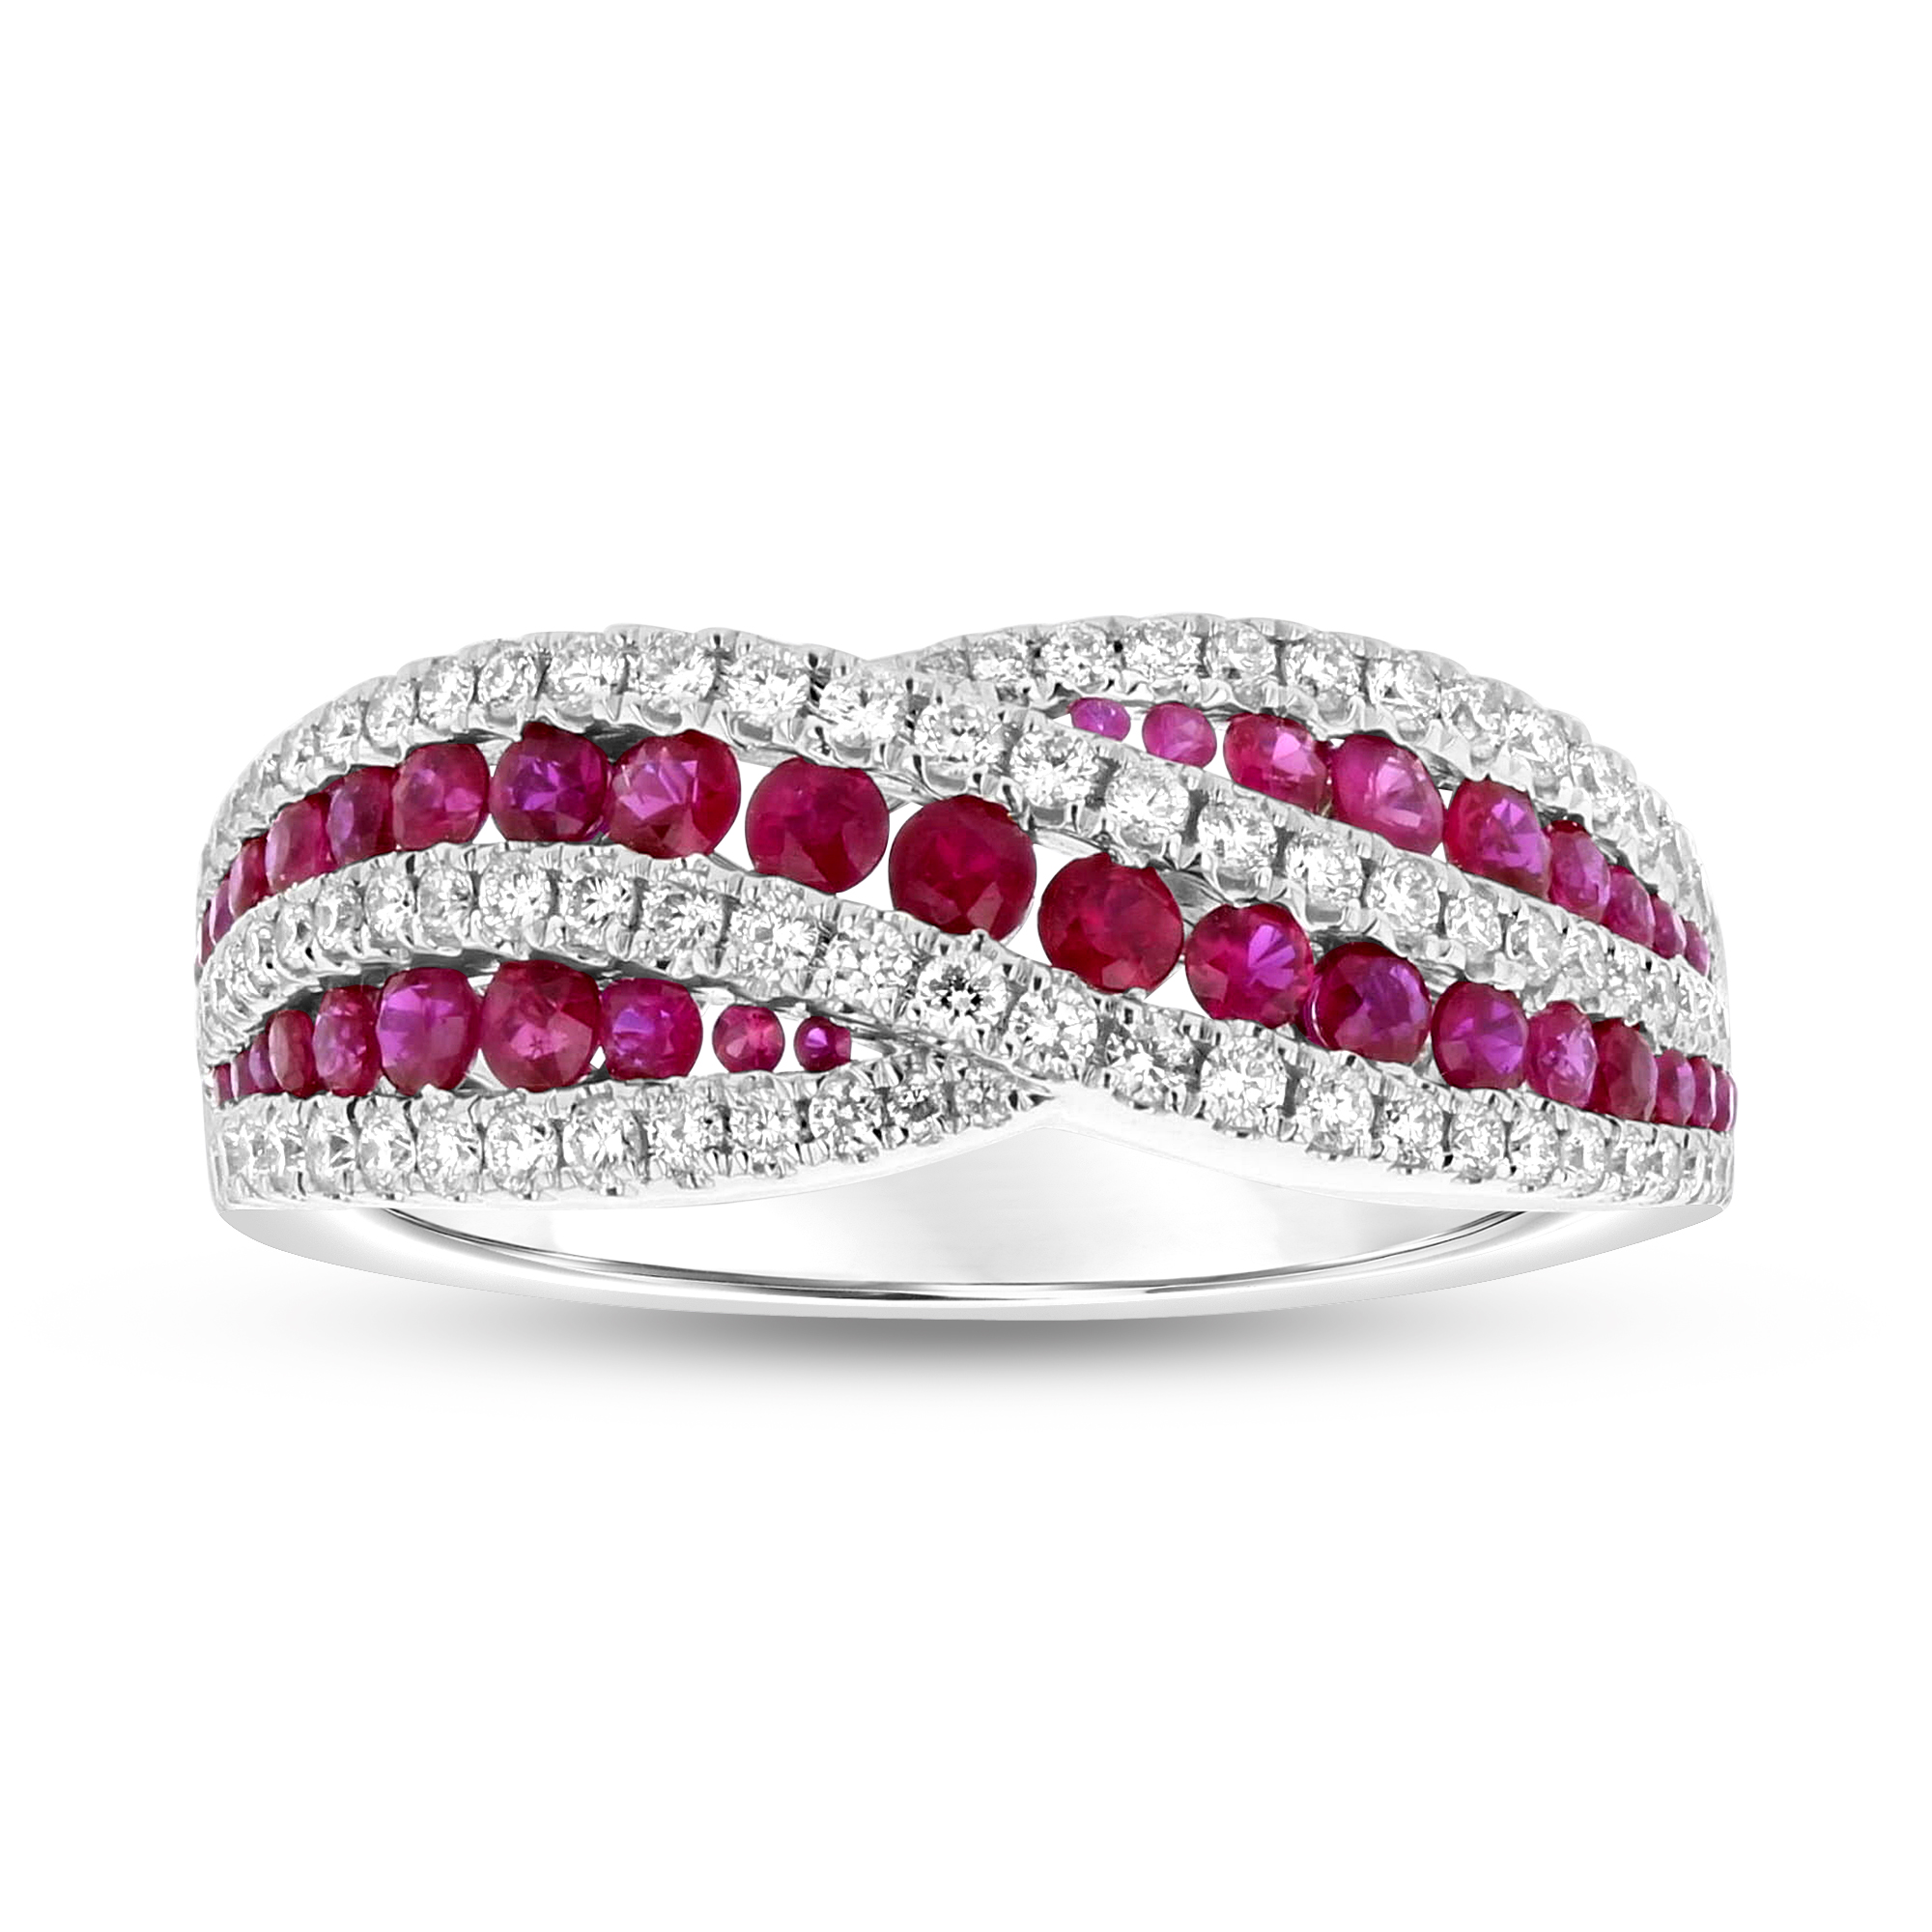 View 1.30ctw Diamond and Ruby Ring in 18k White Gold